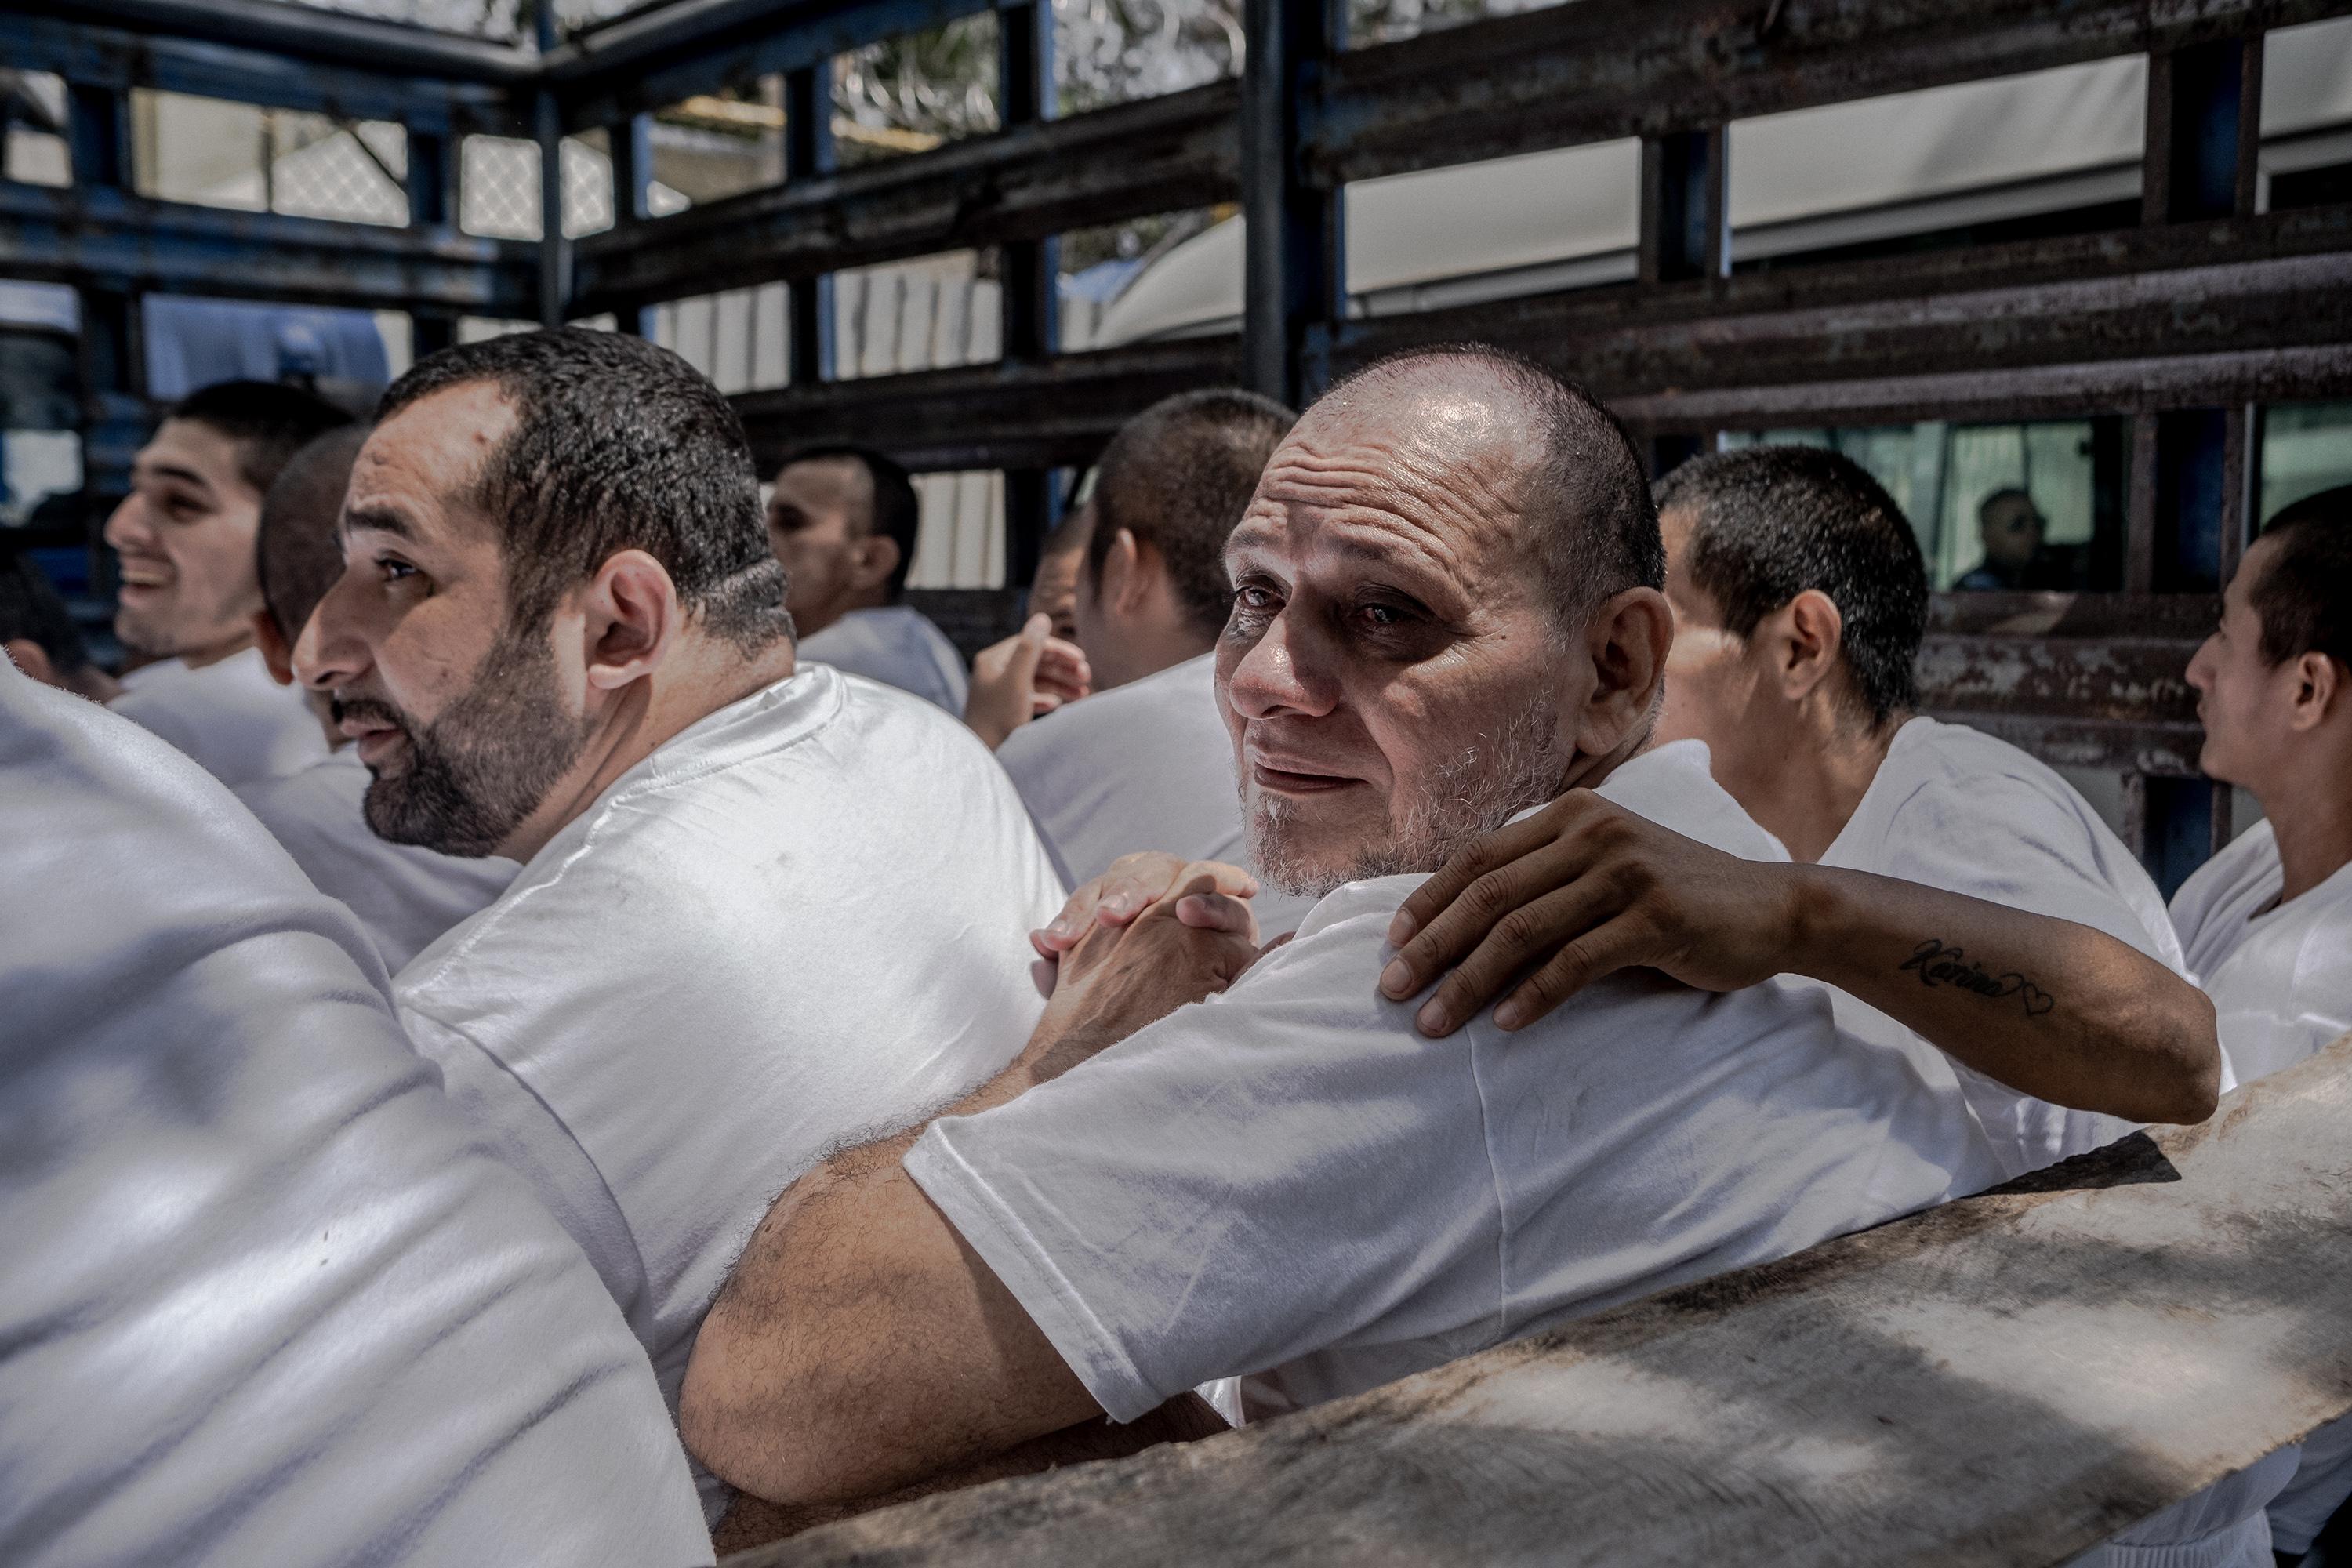 Antonio Meléndez, 58, cries before entering Ilopango Prison. Antonio was hoping to see his family before being taken away, but due to a lack of information on detainees, his family was unable to locate him. Photo: Carlos Barrera/El Faro